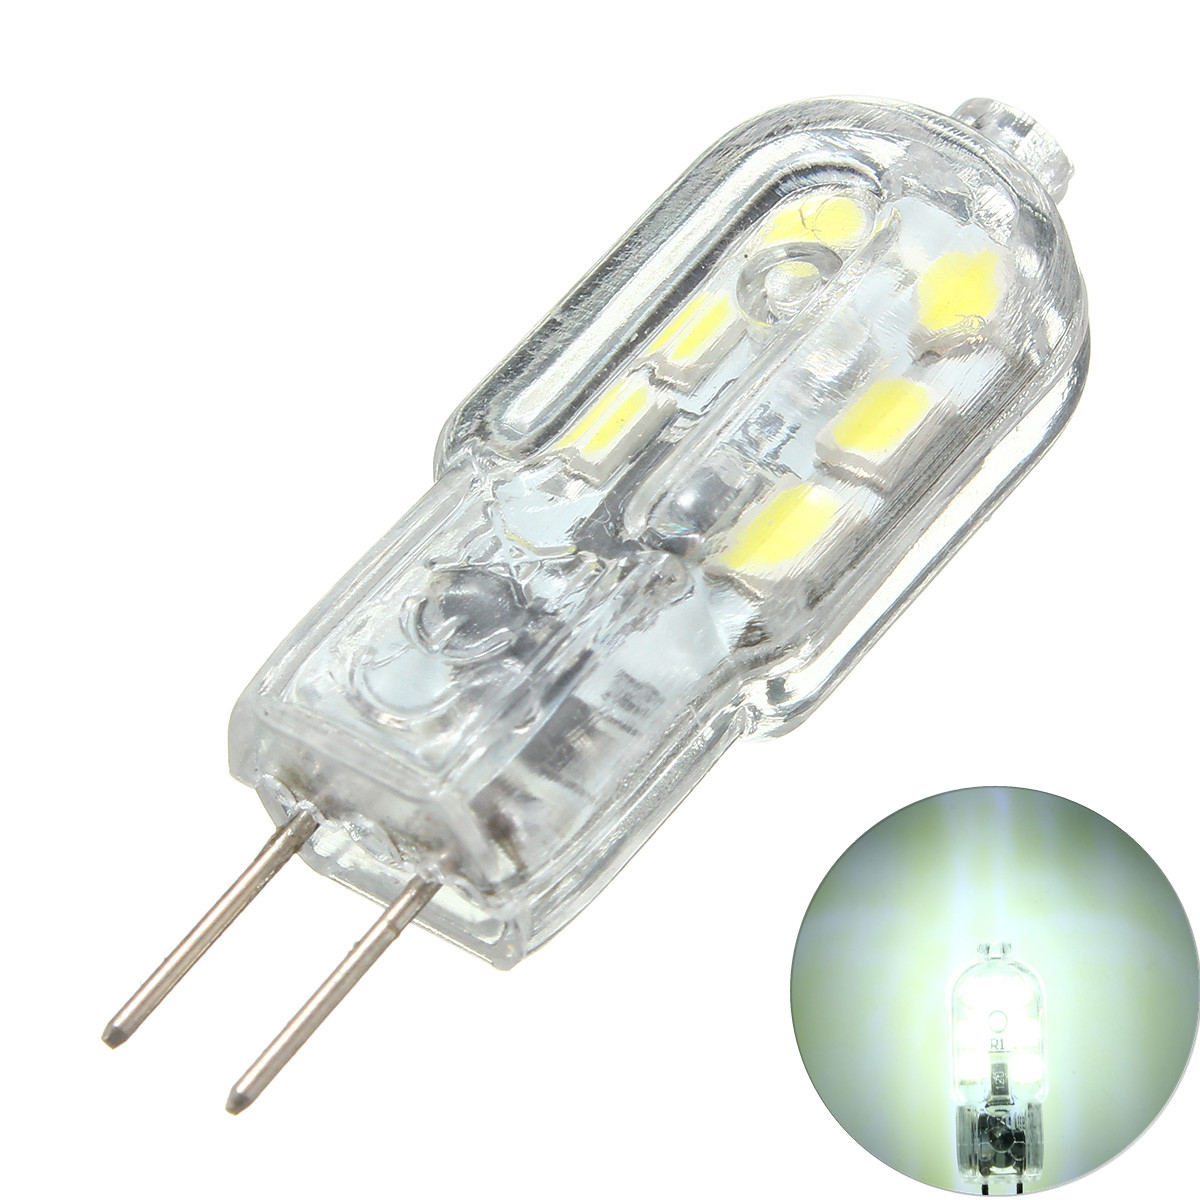 

6PCS G4 Base 2W 2835 Non-dimmable Cool White Transparent 12 LED Light Bulb for Indoor Home DC12V